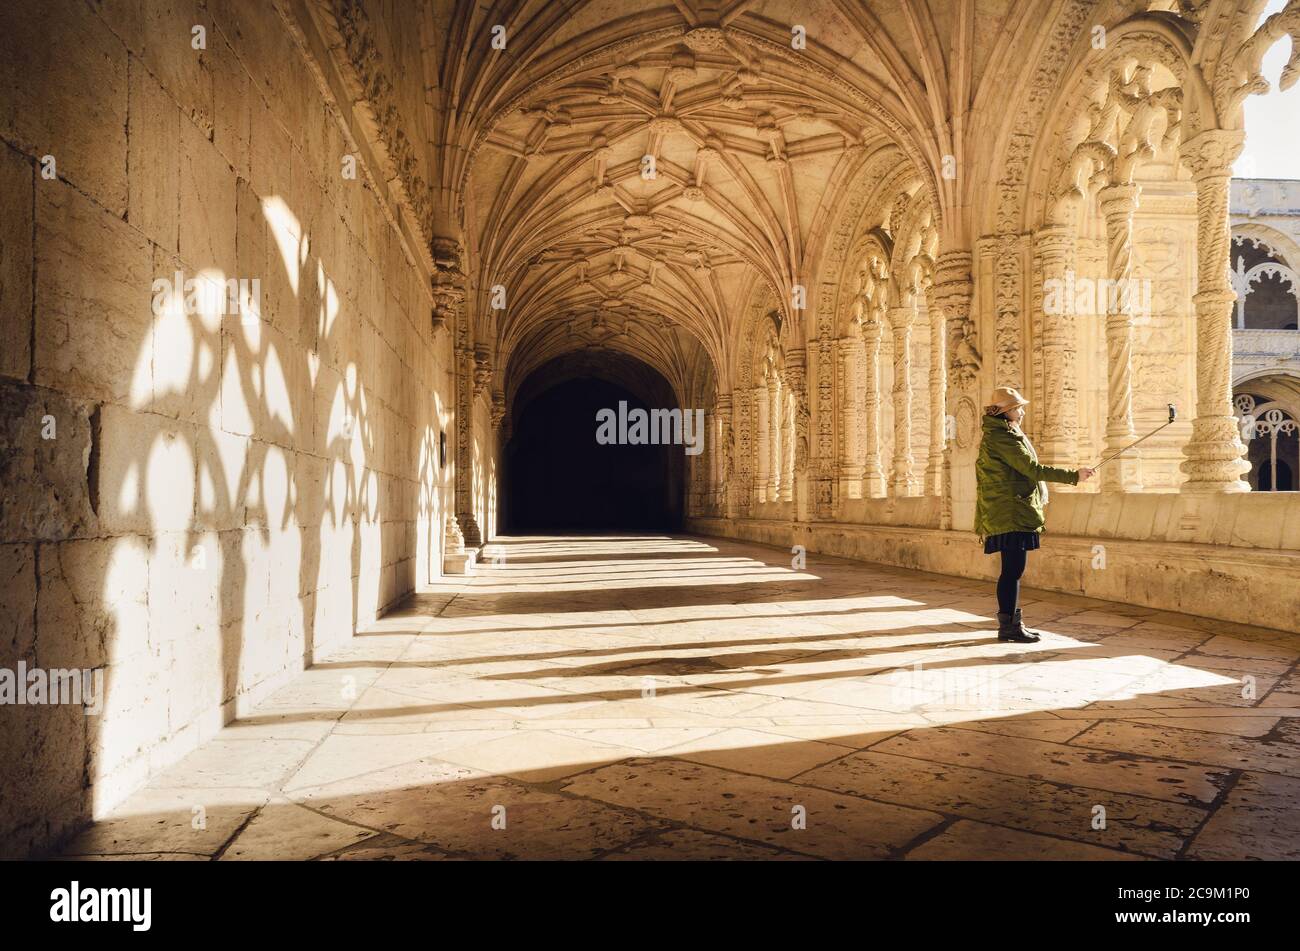 LISBON, PORTUGAL - FEBRUARY 3, 2019: Asian woman making a snapshot to her shadow with selfie stick and phone in the cloister of the Jeronimos monaster Stock Photo